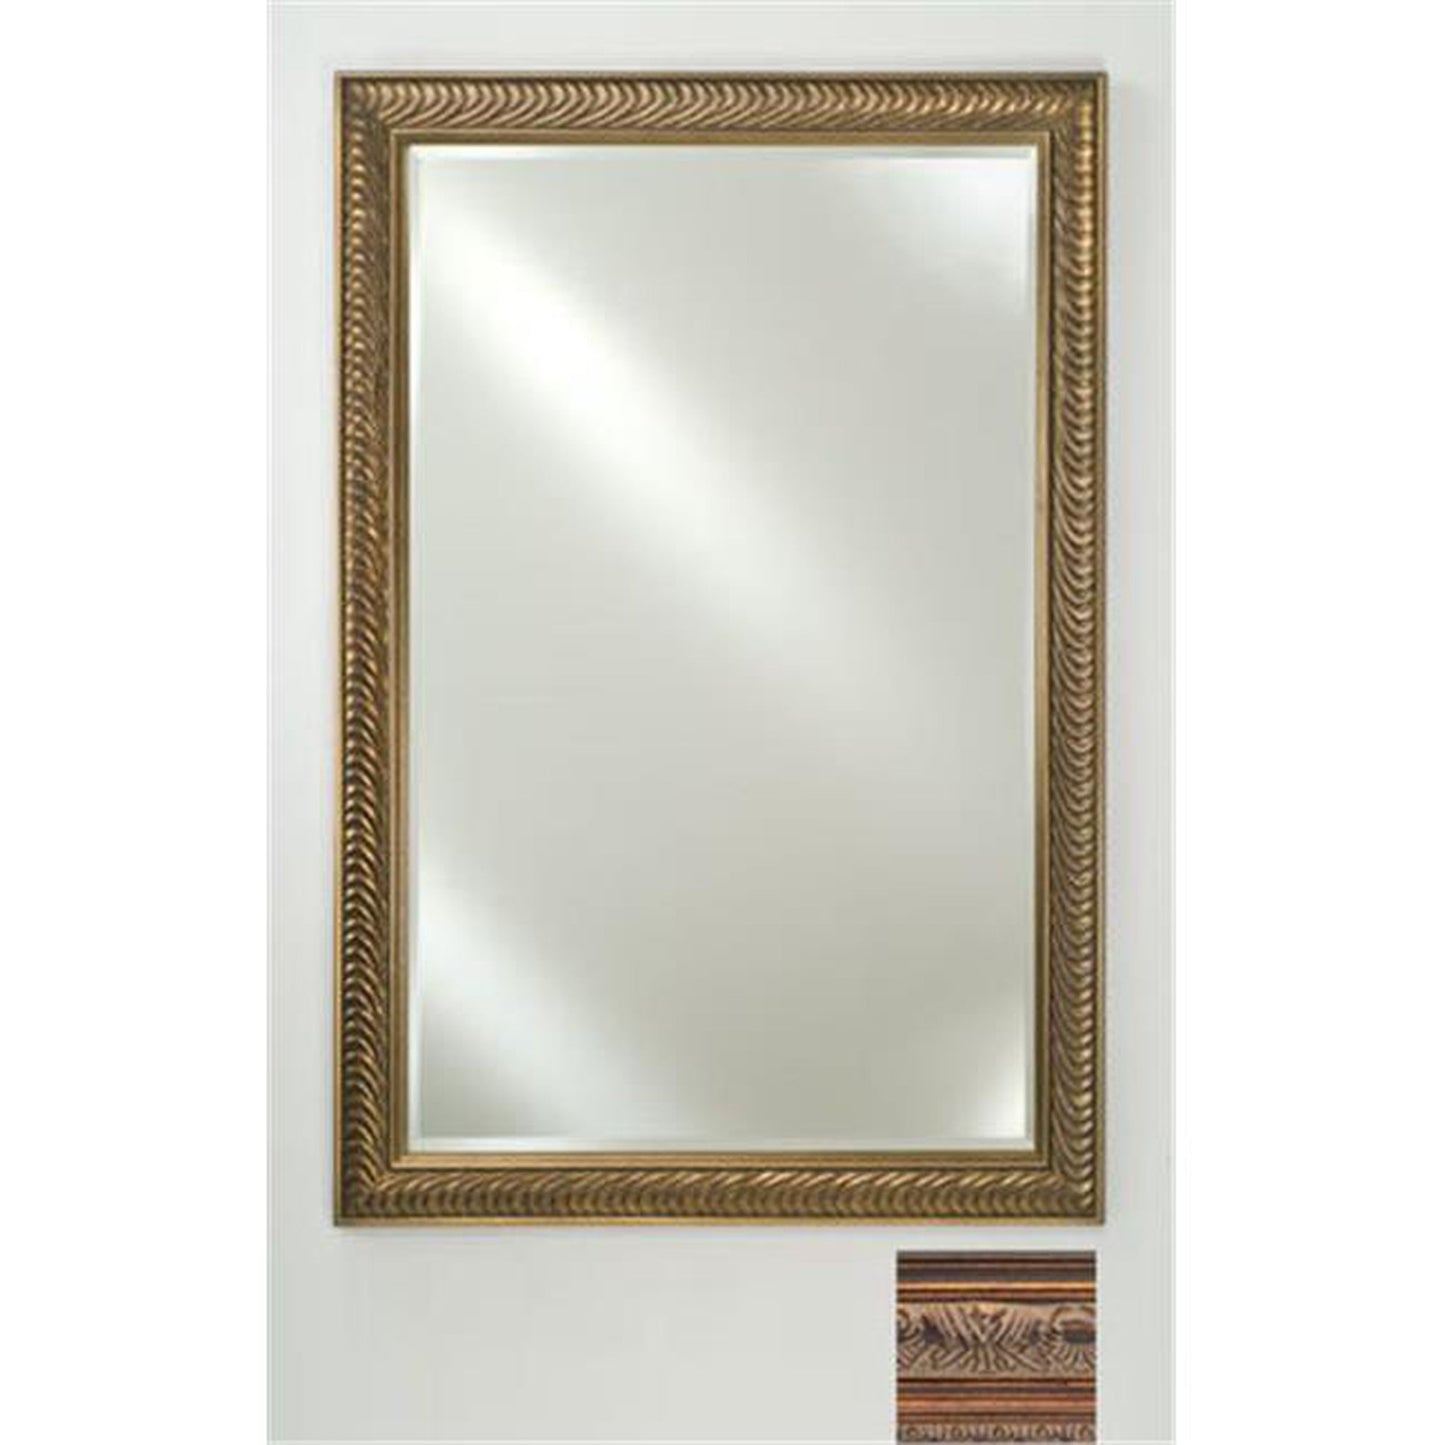 Afina Signature 16" x 22" Siena Oiled Bronze Framed Mirror With Beveled Edge